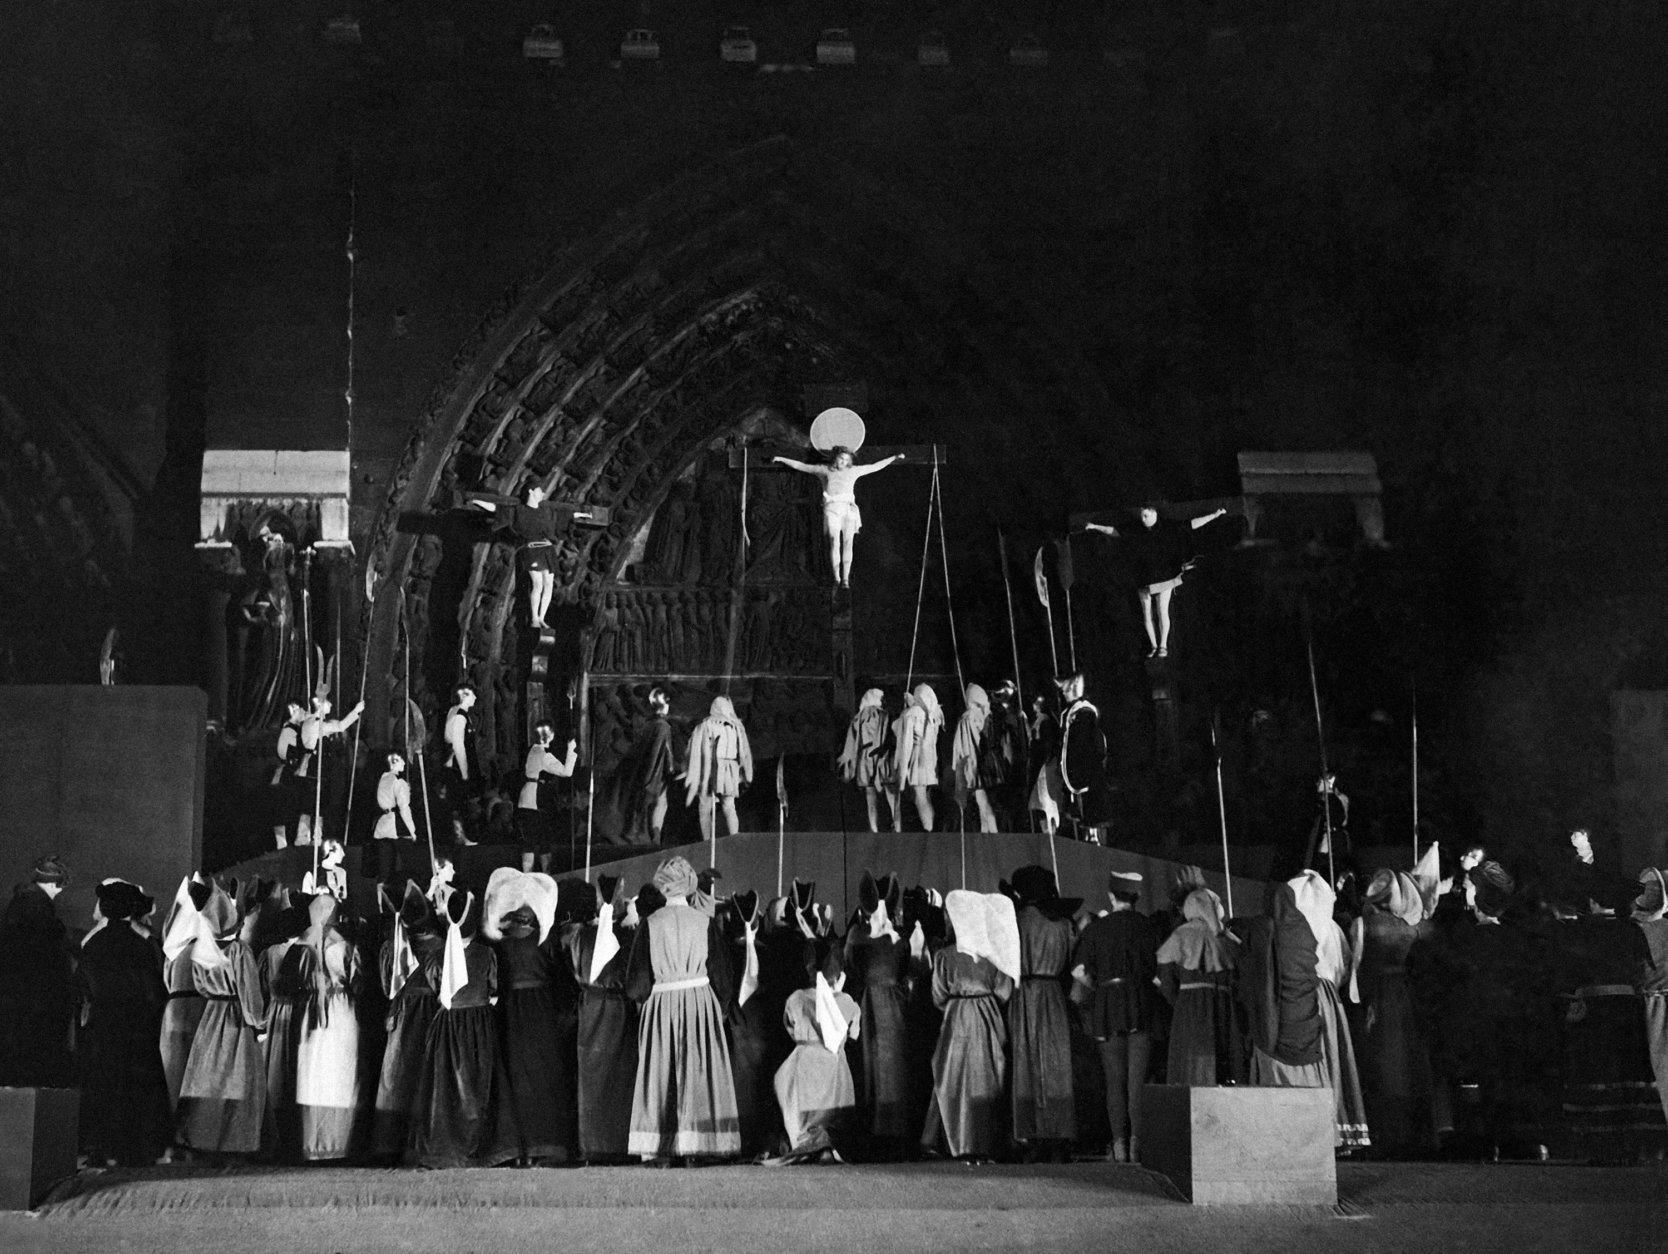 The scene of Golgotha during the Passion Play in Notre Dame, Paris, France on June 4, 1936. (AP Photo)